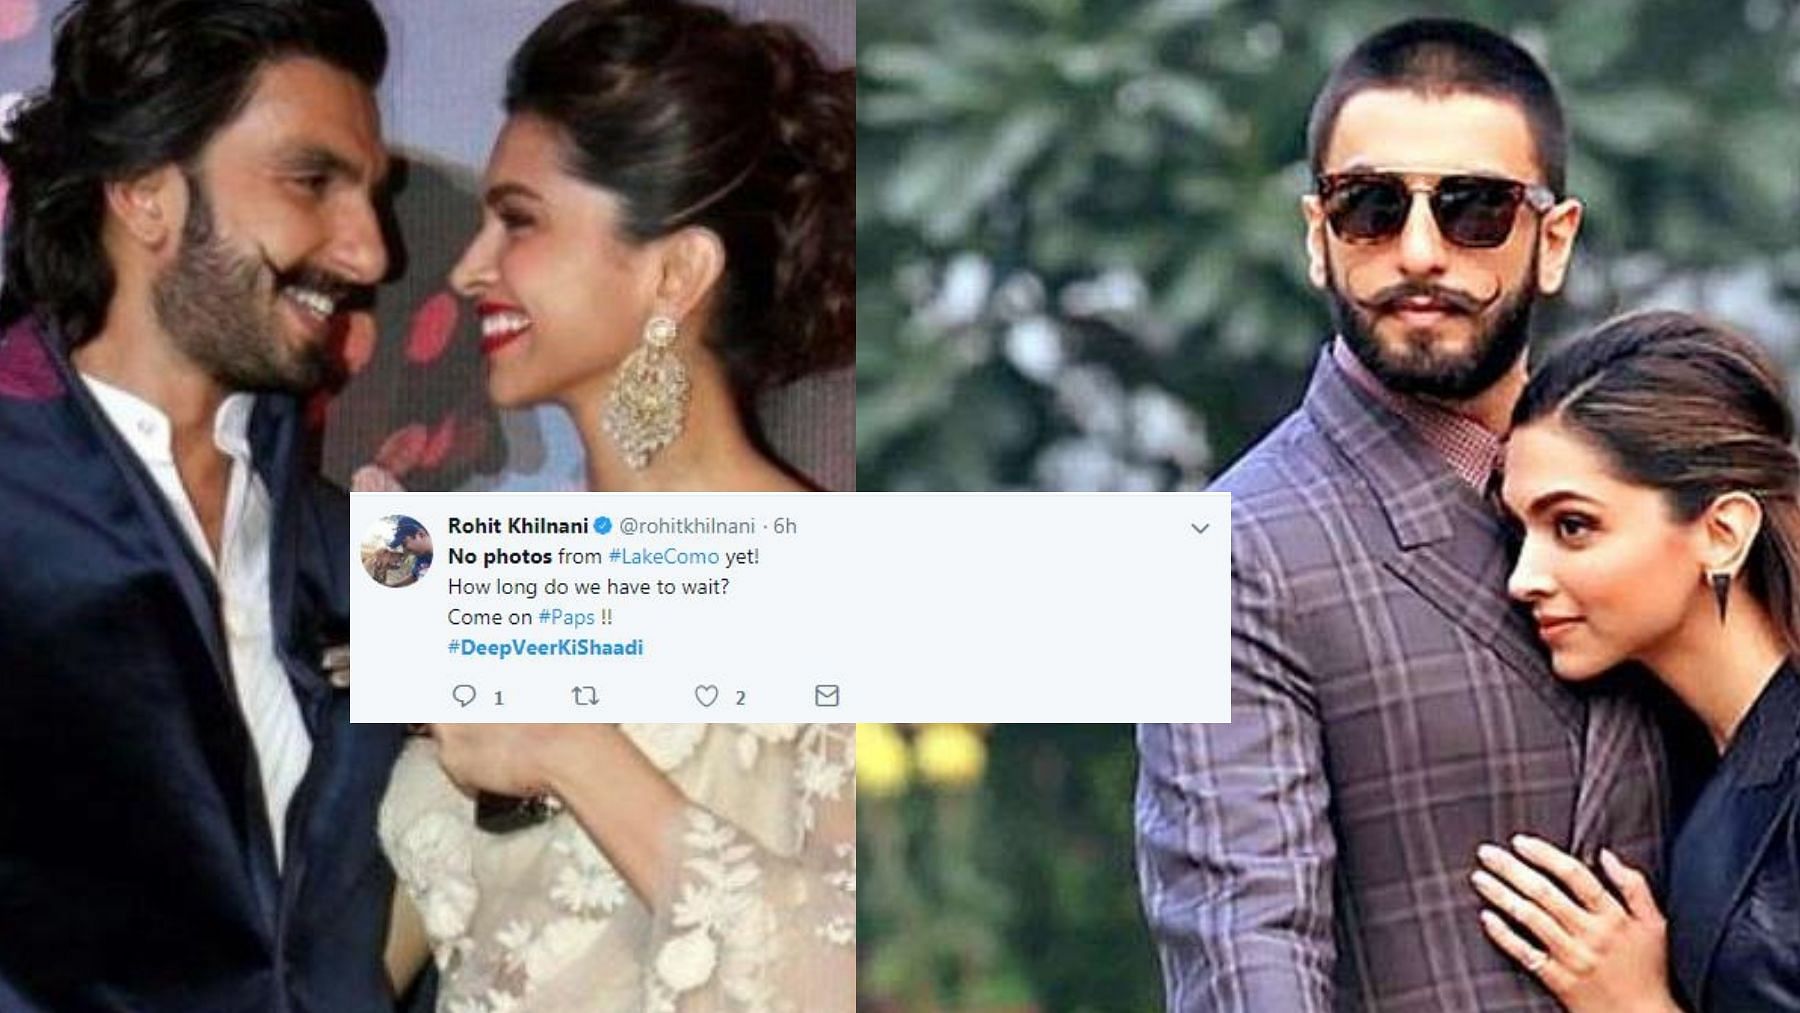 Fans desperately waited for pictures from #DeepVeerKiShaadi.